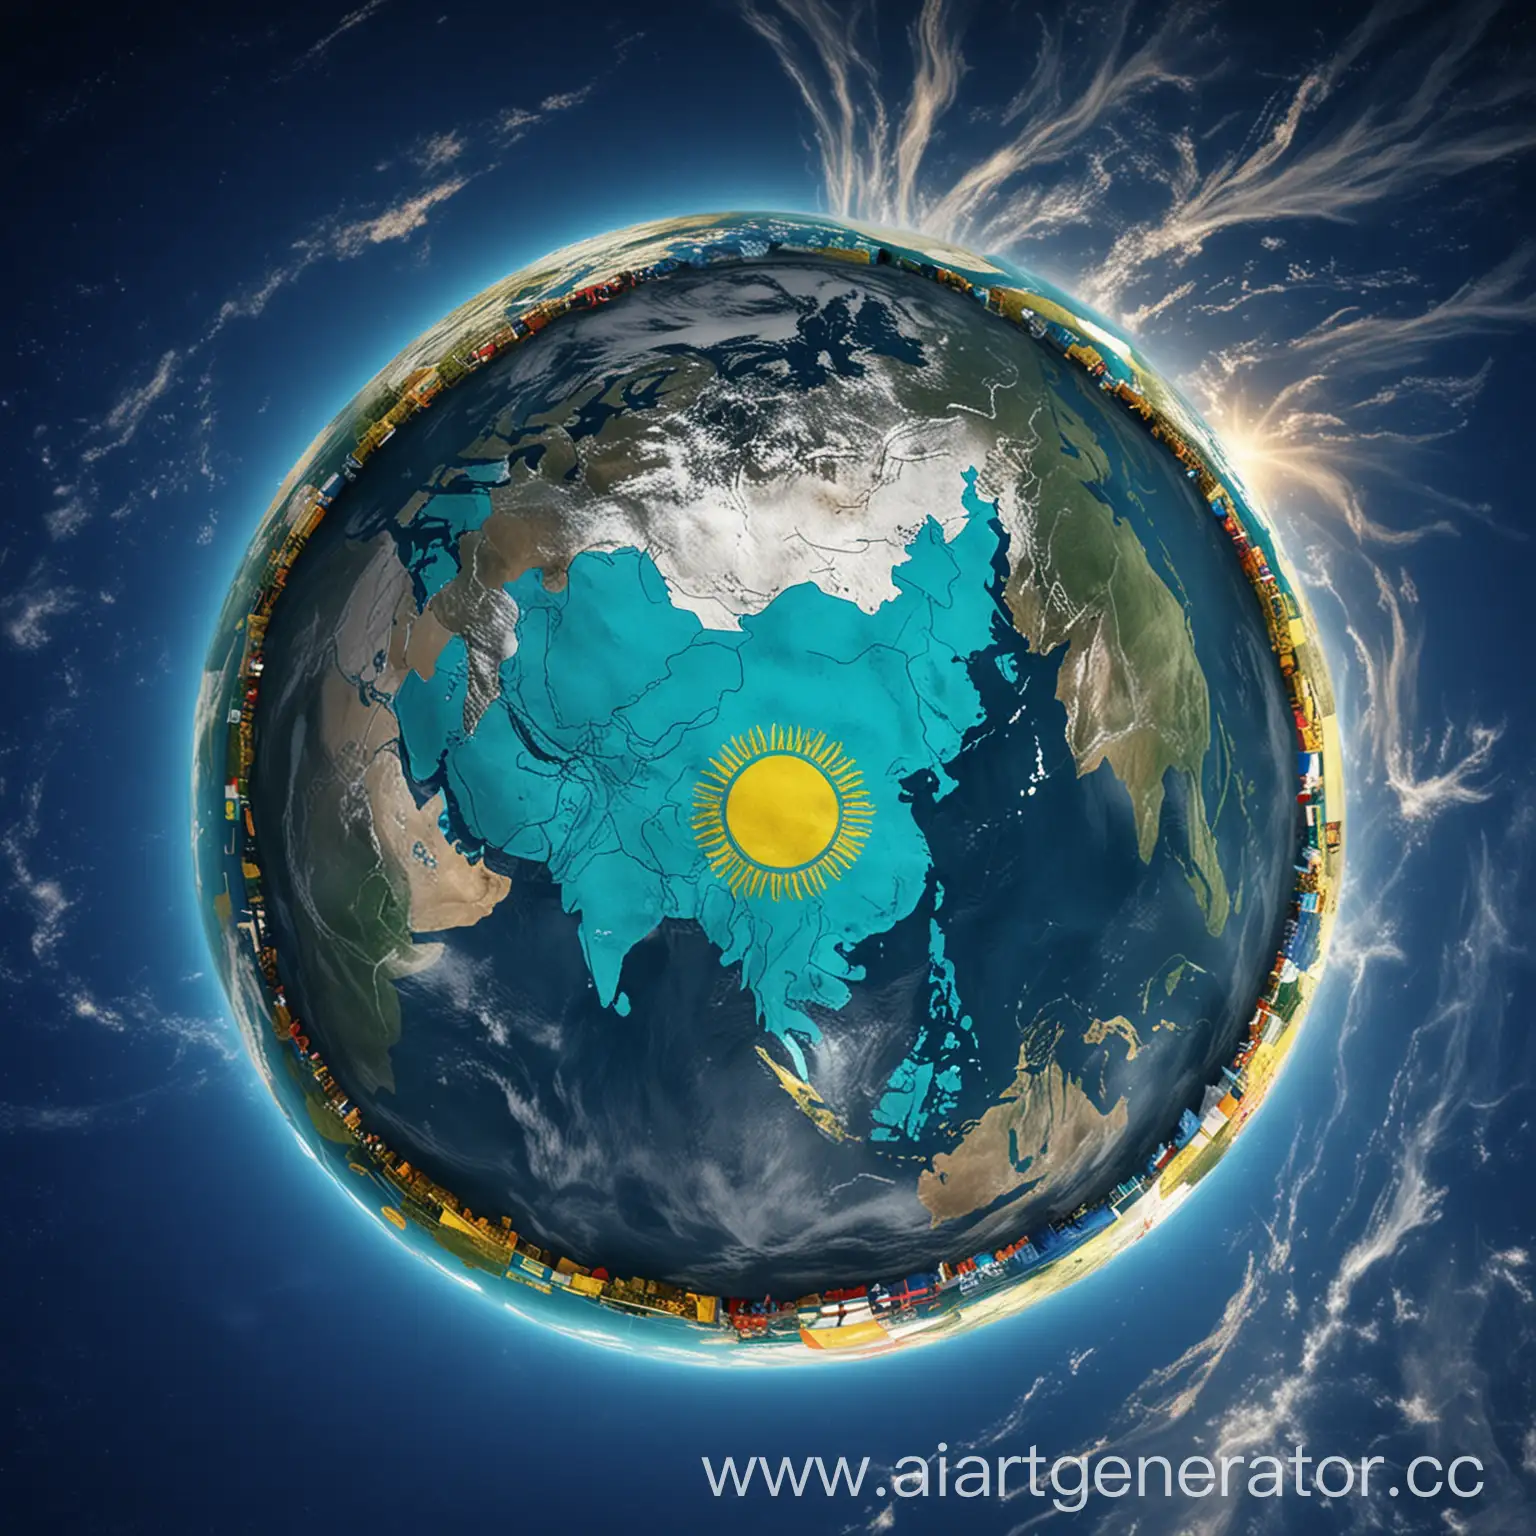 SHOW THE EARTH WITH FLAG OF KAZAKHSTAN WHICH IS COLOURFUL  IN THE CENTER  